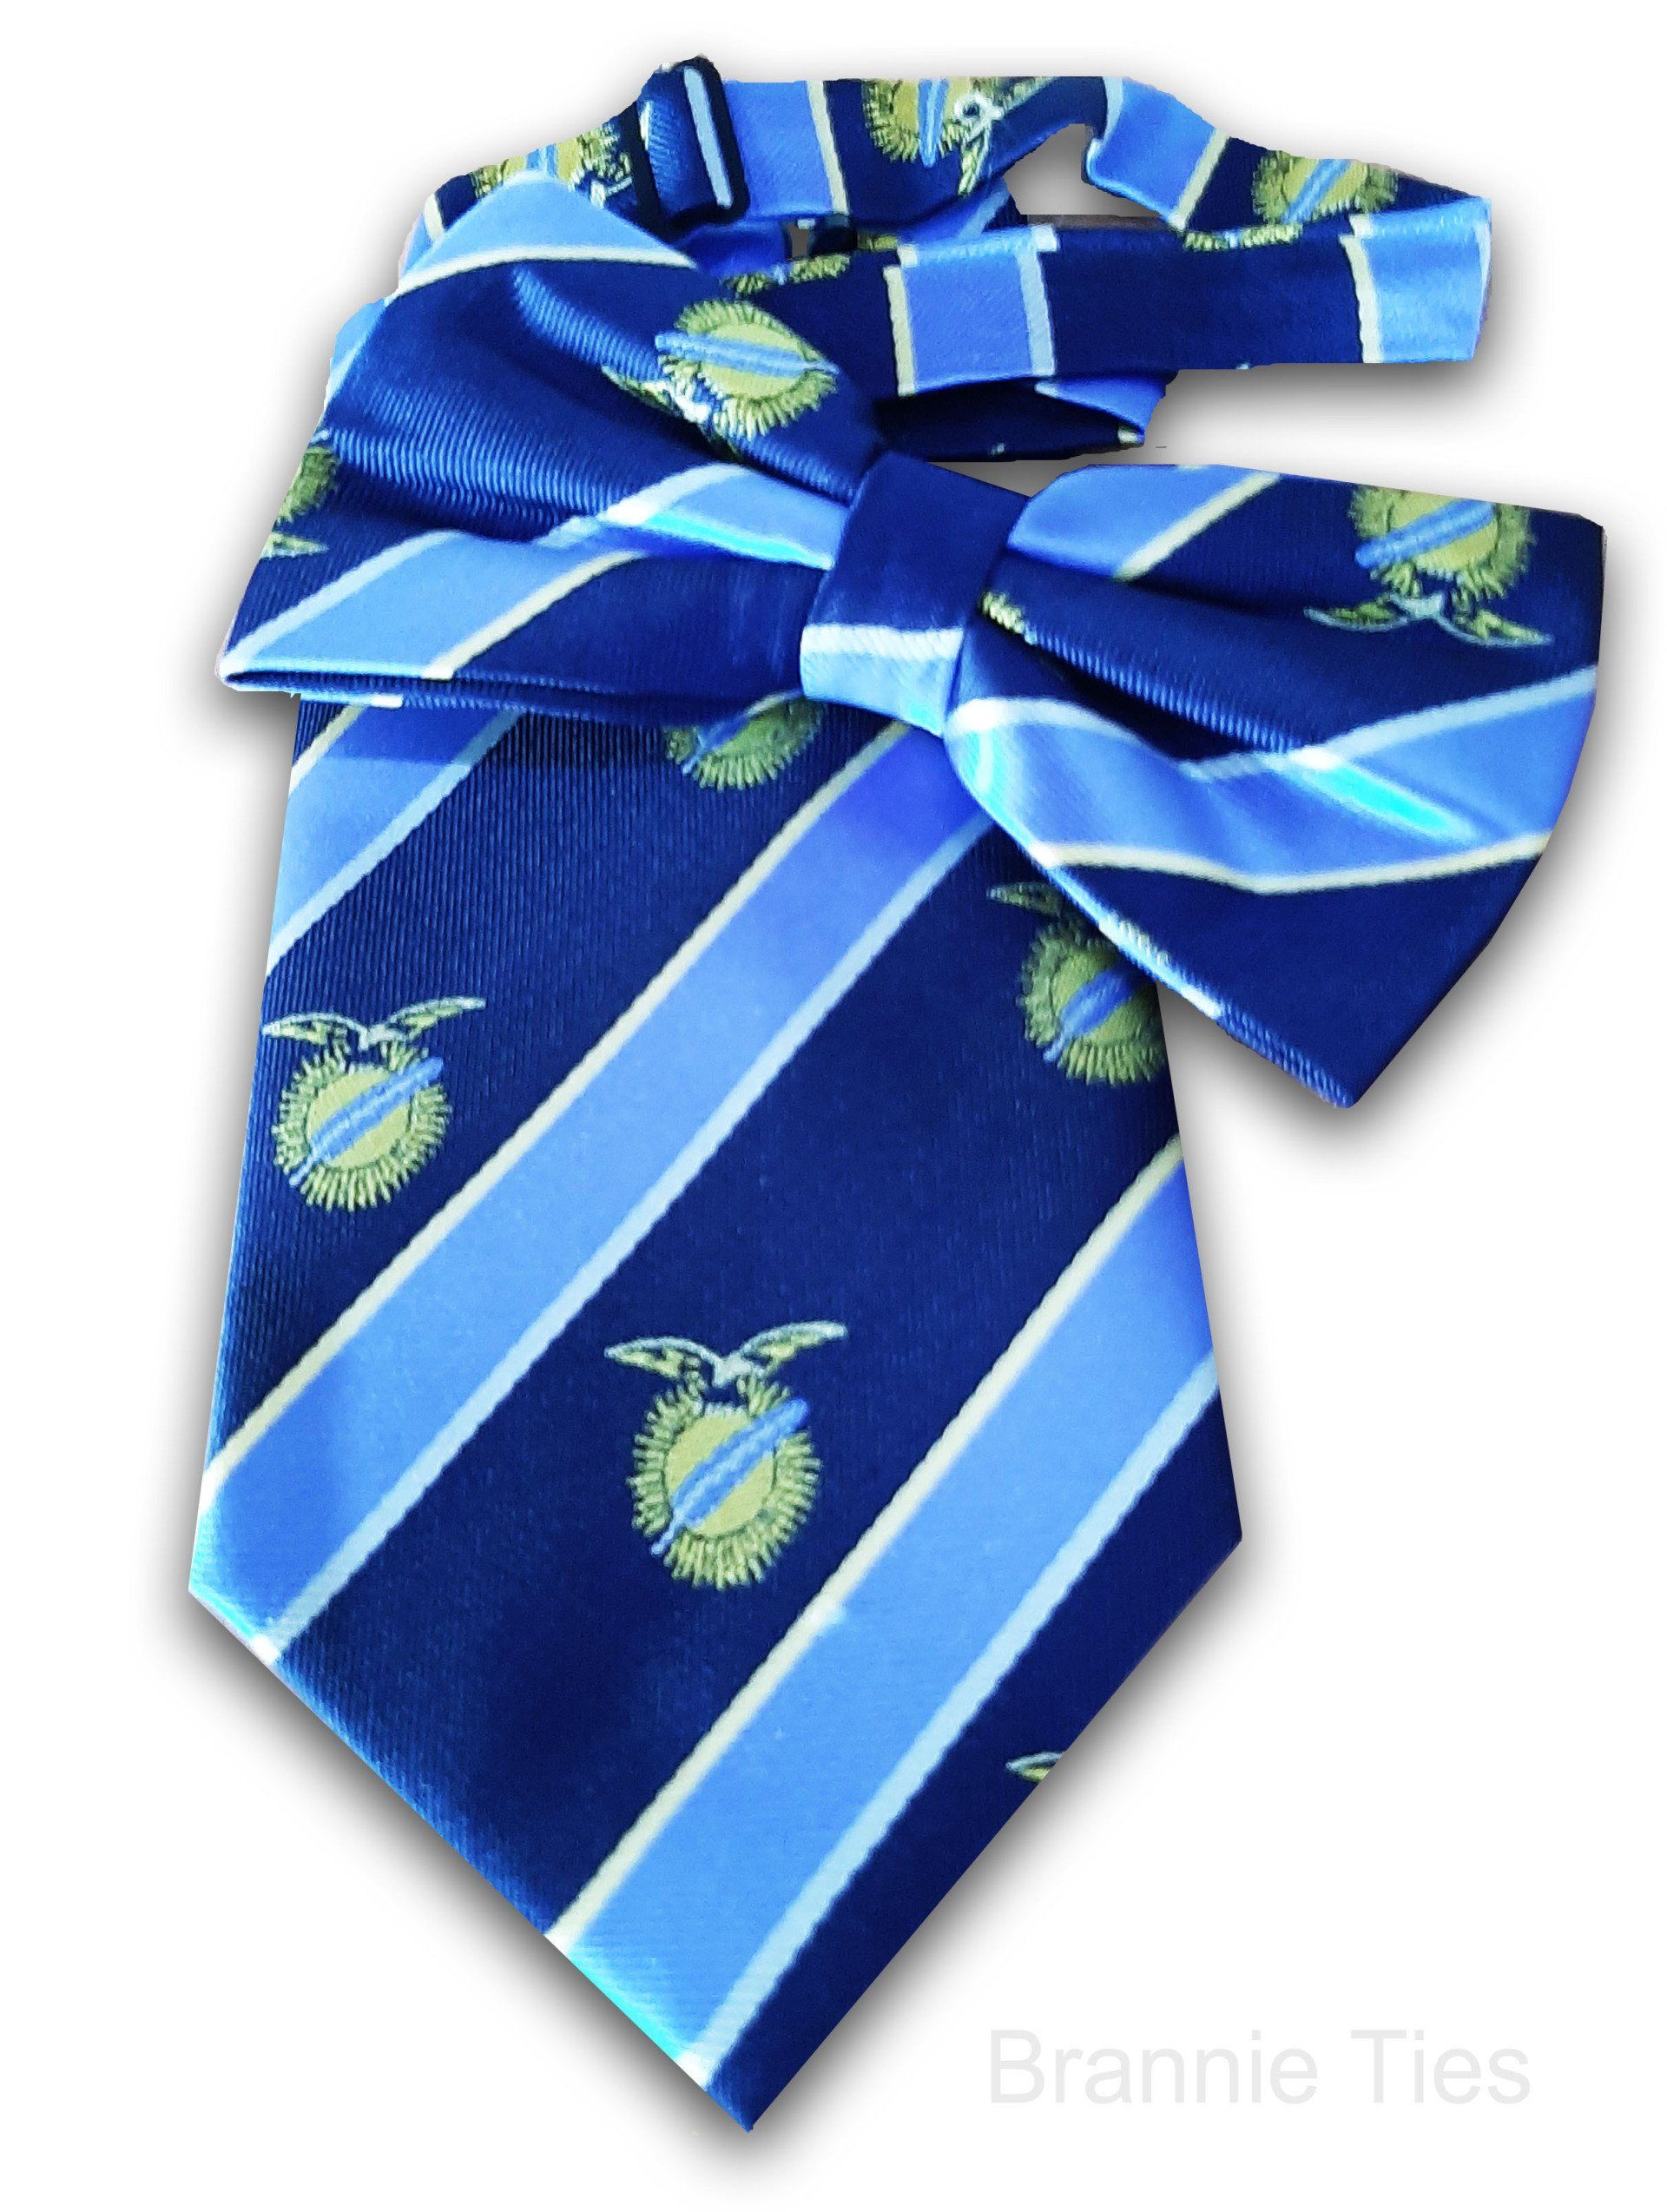 military ties and bowties